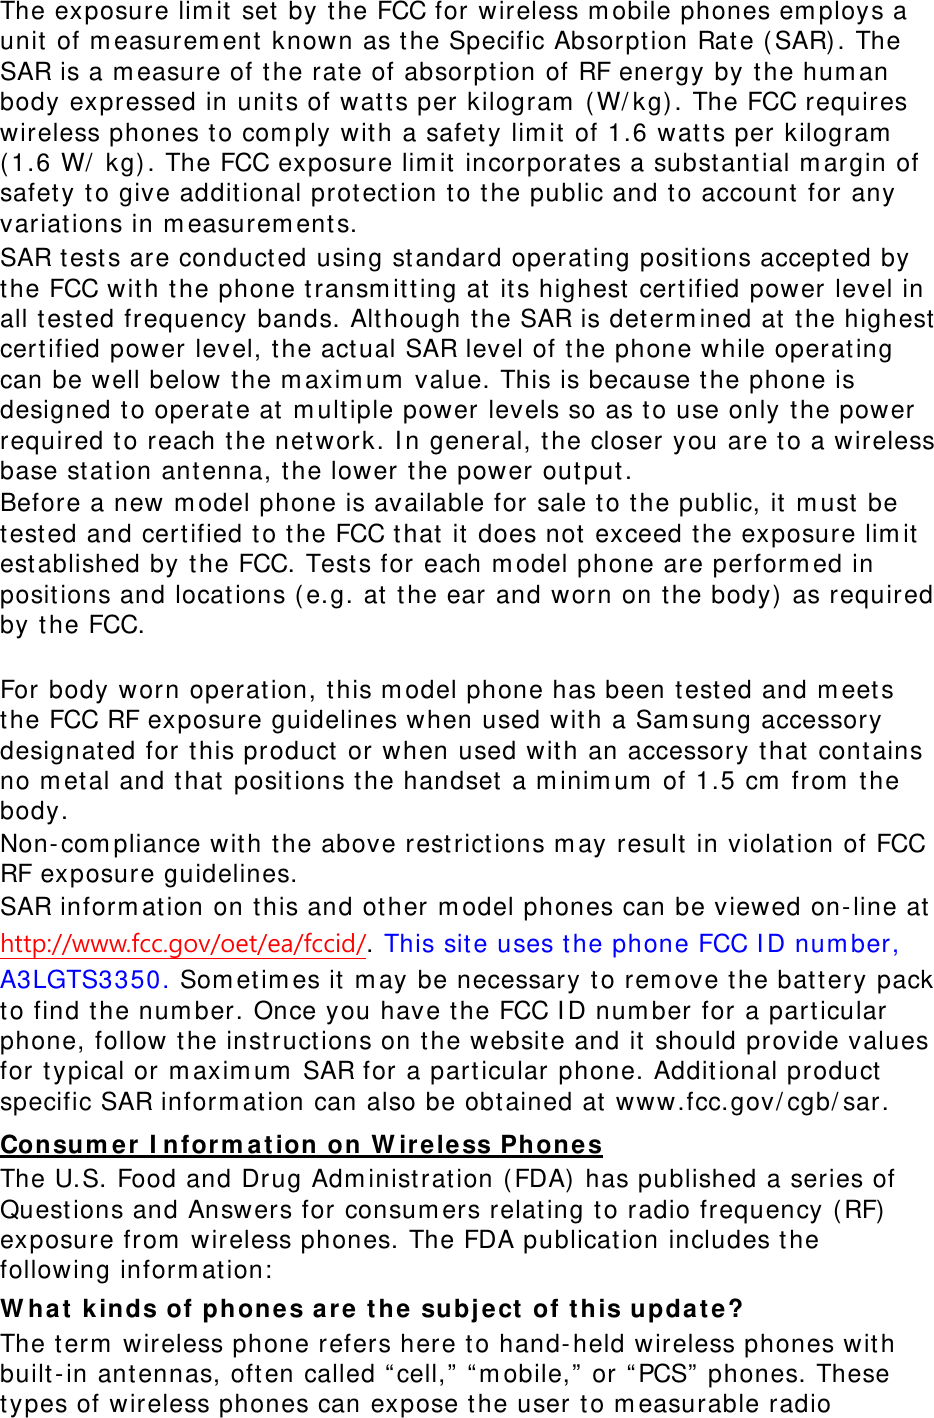 The exposure lim it  set by the FCC for wireless m obile phones em ploys a unit  of m easurem ent  known as t he Specific Absorpt ion Rat e ( SAR). The SAR is a m easure of t he rat e of absorpt ion of RF energy by t he hum an body expressed in unit s of wat ts per kilogram  ( W/ kg) . The FCC requires wireless phones t o com ply wit h a safet y lim it of 1.6 wat t s per kilogram  ( 1.6 W/  kg) . The FCC exposure lim it  incorporat es a subst ant ial m argin of safet y t o give additional prot ect ion to the public and t o account  for any variat ions in m easurem ents. SAR t est s are conduct ed using st andard operat ing posit ions accept ed by the FCC wit h t he phone t ransm it ting at it s highest  cert ified power level in all t ested frequency bands. Alt hough the SAR is det erm ined at t he highest  cert ified power level, t he act ual SAR level of t he phone while operat ing can be well below the m axim um  value. This is because t he phone is designed t o operat e at  m ult iple power levels so as to use only t he power required t o reach the net work. I n general, t he closer you are t o a wireless base st at ion antenna, the lower t he power output . Before a new m odel phone is available for sale t o t he public, it  m ust be tested and certified t o t he FCC t hat  it  does not  exceed the exposure lim it  est ablished by the FCC. Test s for each m odel phone are perform ed in posit ions and locat ions ( e.g. at t he ear and worn on t he body)  as required by t he FCC.      For body worn operat ion, t his m odel phone has been t est ed and m eets the FCC RF exposure guidelines when used wit h a Sam sung accessory designat ed for t his product  or when used wit h an accessory t hat  cont ains no m etal and that  posit ions the handset a m inim um  of 1.5 cm  from  t he body.  Non- com pliance wit h t he above rest rict ions m ay result in violat ion of FCC RF exposure guidelines. SAR inform at ion on this and ot her m odel phones can be viewed on- line at  http://www.fcc.gov/oet/ea/fccid/. This sit e uses the phone FCC I D num ber, A3LGTS3350. Som et im es it m ay be necessary t o rem ove t he bat tery pack to find the num ber. Once you have t he FCC I D num ber for a particular phone, follow t he instructions on t he websit e and it should provide values for t ypical or m axim um  SAR for a part icular phone. Addit ional product  specific SAR inform at ion can also be obt ained at  www.fcc.gov/ cgb/ sar. Consum e r I nfor m at ion  on W ir ele ss Phon es The U.S. Food and Drug Adm inist rat ion (FDA)  has published a series of Quest ions and Answers for consum ers relating t o radio frequency ( RF) exposure from  wireless phones. The FDA publicat ion includes t he following inform at ion:  W hat  k inds of phones a re  t he  subj e ct  of t his update ? The t erm  wireless phone refers here t o hand- held wireless phones wit h built-in antennas, oft en called “ cell,”  “ m obile,”  or “ PCS”  phones. These types of wireless phones can expose the user t o m easurable radio 